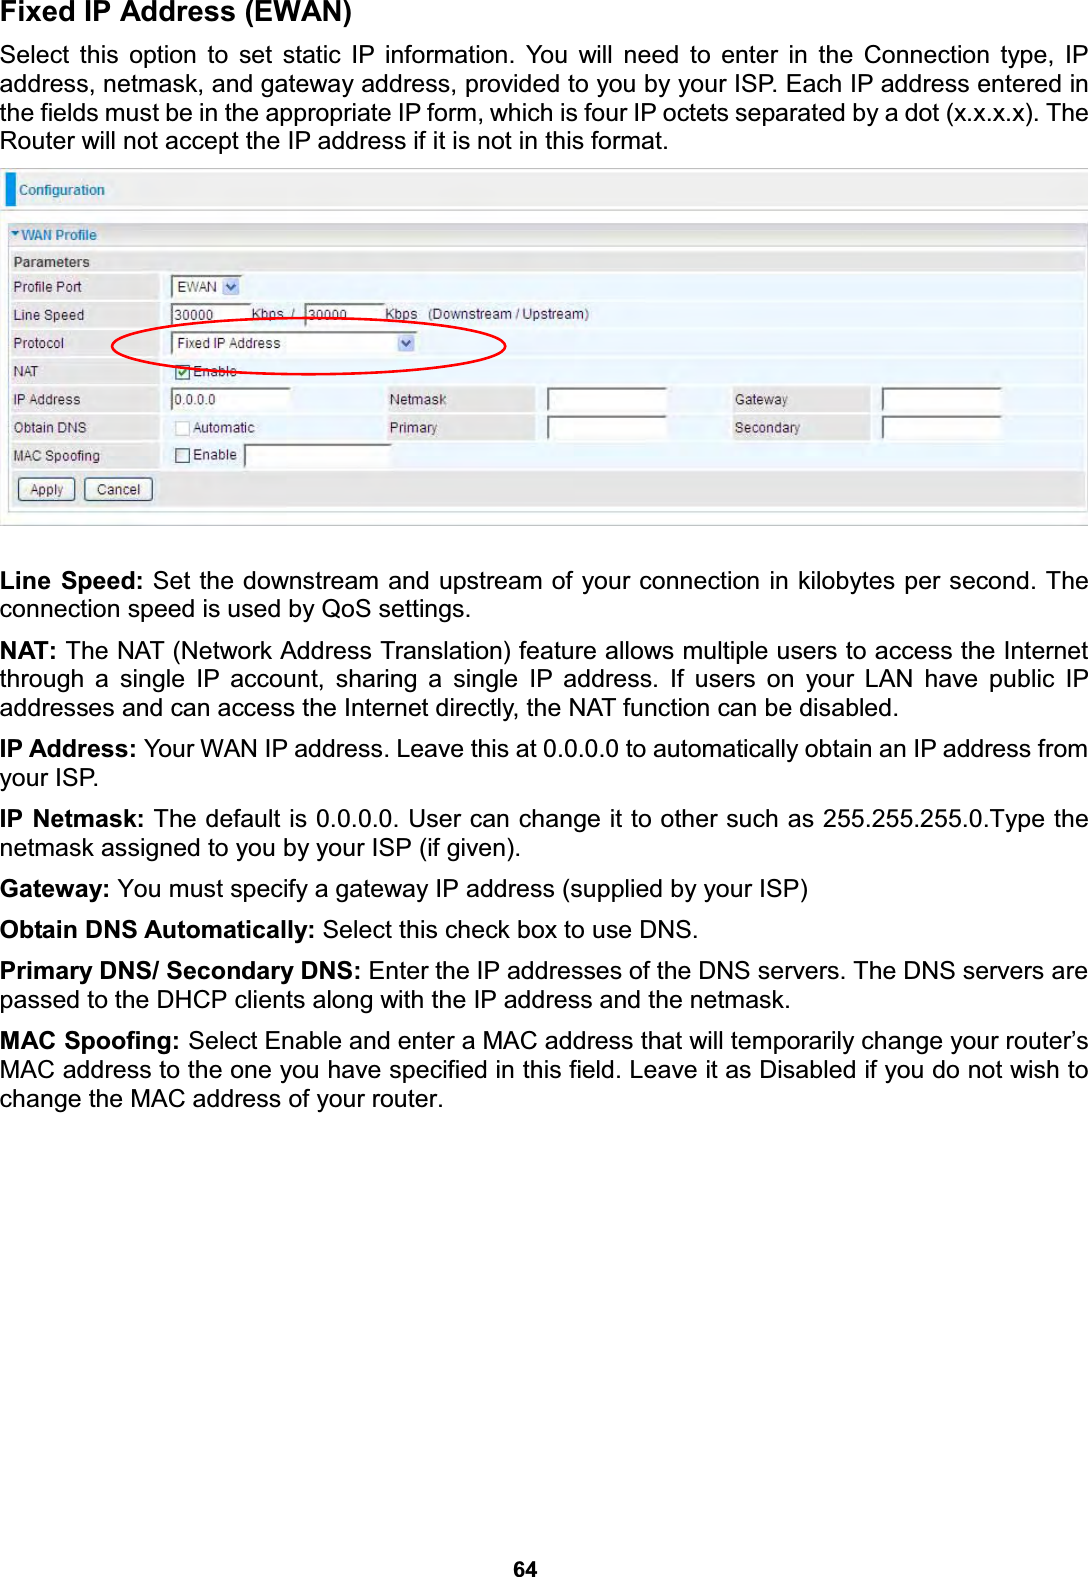  64  Fixed IP Address (EWAN)  Select this option to set static IP information. You will need to enter in the Connection type, IP address, netmask, and gateway address, provided to you by your ISP. Each IP address entered in the fields must be in the appropriate IP form, which is four IP octets separated by a dot (x.x.x.x). The Router will not accept the IP address if it is not in this format.    Line Speed: Set the downstream and upstream of your connection in kilobytes per second. The connection speed is used by QoS settings. NAT: The NAT (Network Address Translation) feature allows multiple users to access the Internet through a single IP account, sharing a single IP address. If users on your LAN have public IP addresses and can access the Internet directly, the NAT function can be disabled. IP Address: Your WAN IP address. Leave this at 0.0.0.0 to automatically obtain an IP address from your ISP.  IP Netmask: The default is 0.0.0.0. User can change it to other such as 255.255.255.0.Type the netmask assigned to you by your ISP (if given). Gateway: You must specify a gateway IP address (supplied by your ISP)  Obtain DNS Automatically: Select this check box to use DNS. Primary DNS/ Secondary DNS: Enter the IP addresses of the DNS servers. The DNS servers are passed to the DHCP clients along with the IP address and the netmask. MAC Spoofing: Select Enable and enter a MAC address that will temporarily change your router’s MAC address to the one you have specified in this field. Leave it as Disabled if you do not wish to change the MAC address of your router.               